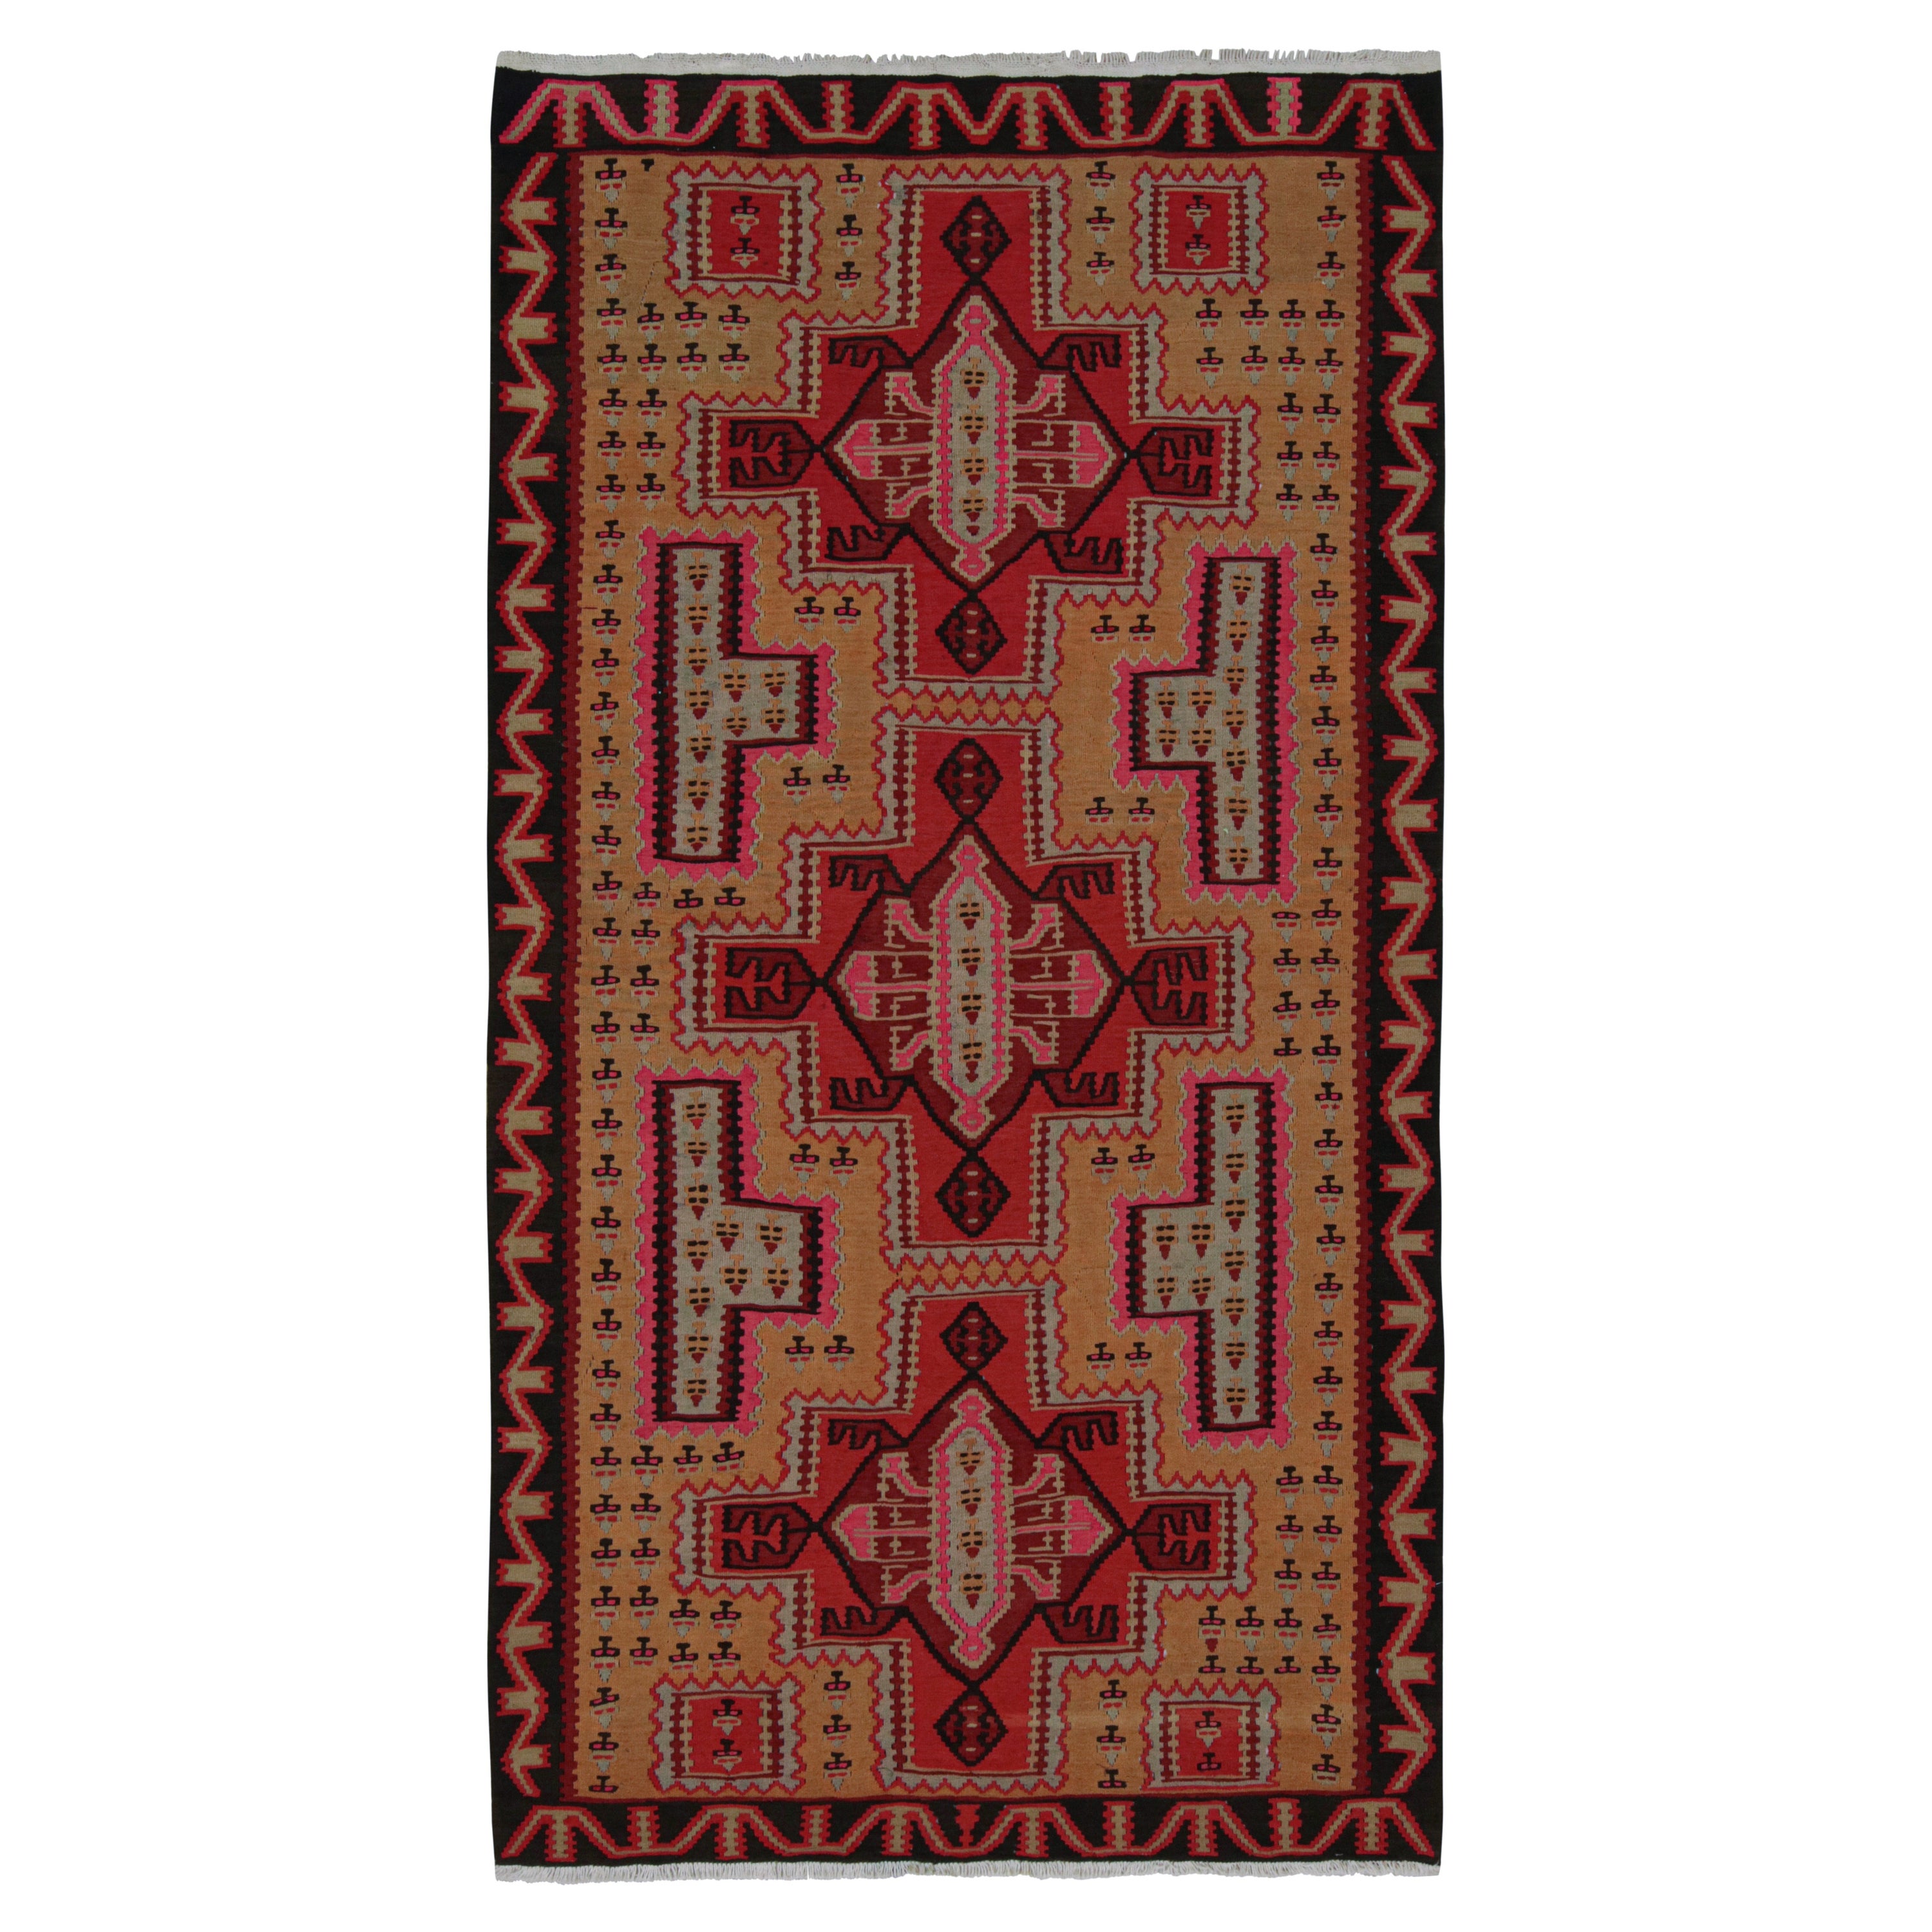 Vintage Persian Kilim with Red Medallions on a Gold Field, from Rug & Kilim